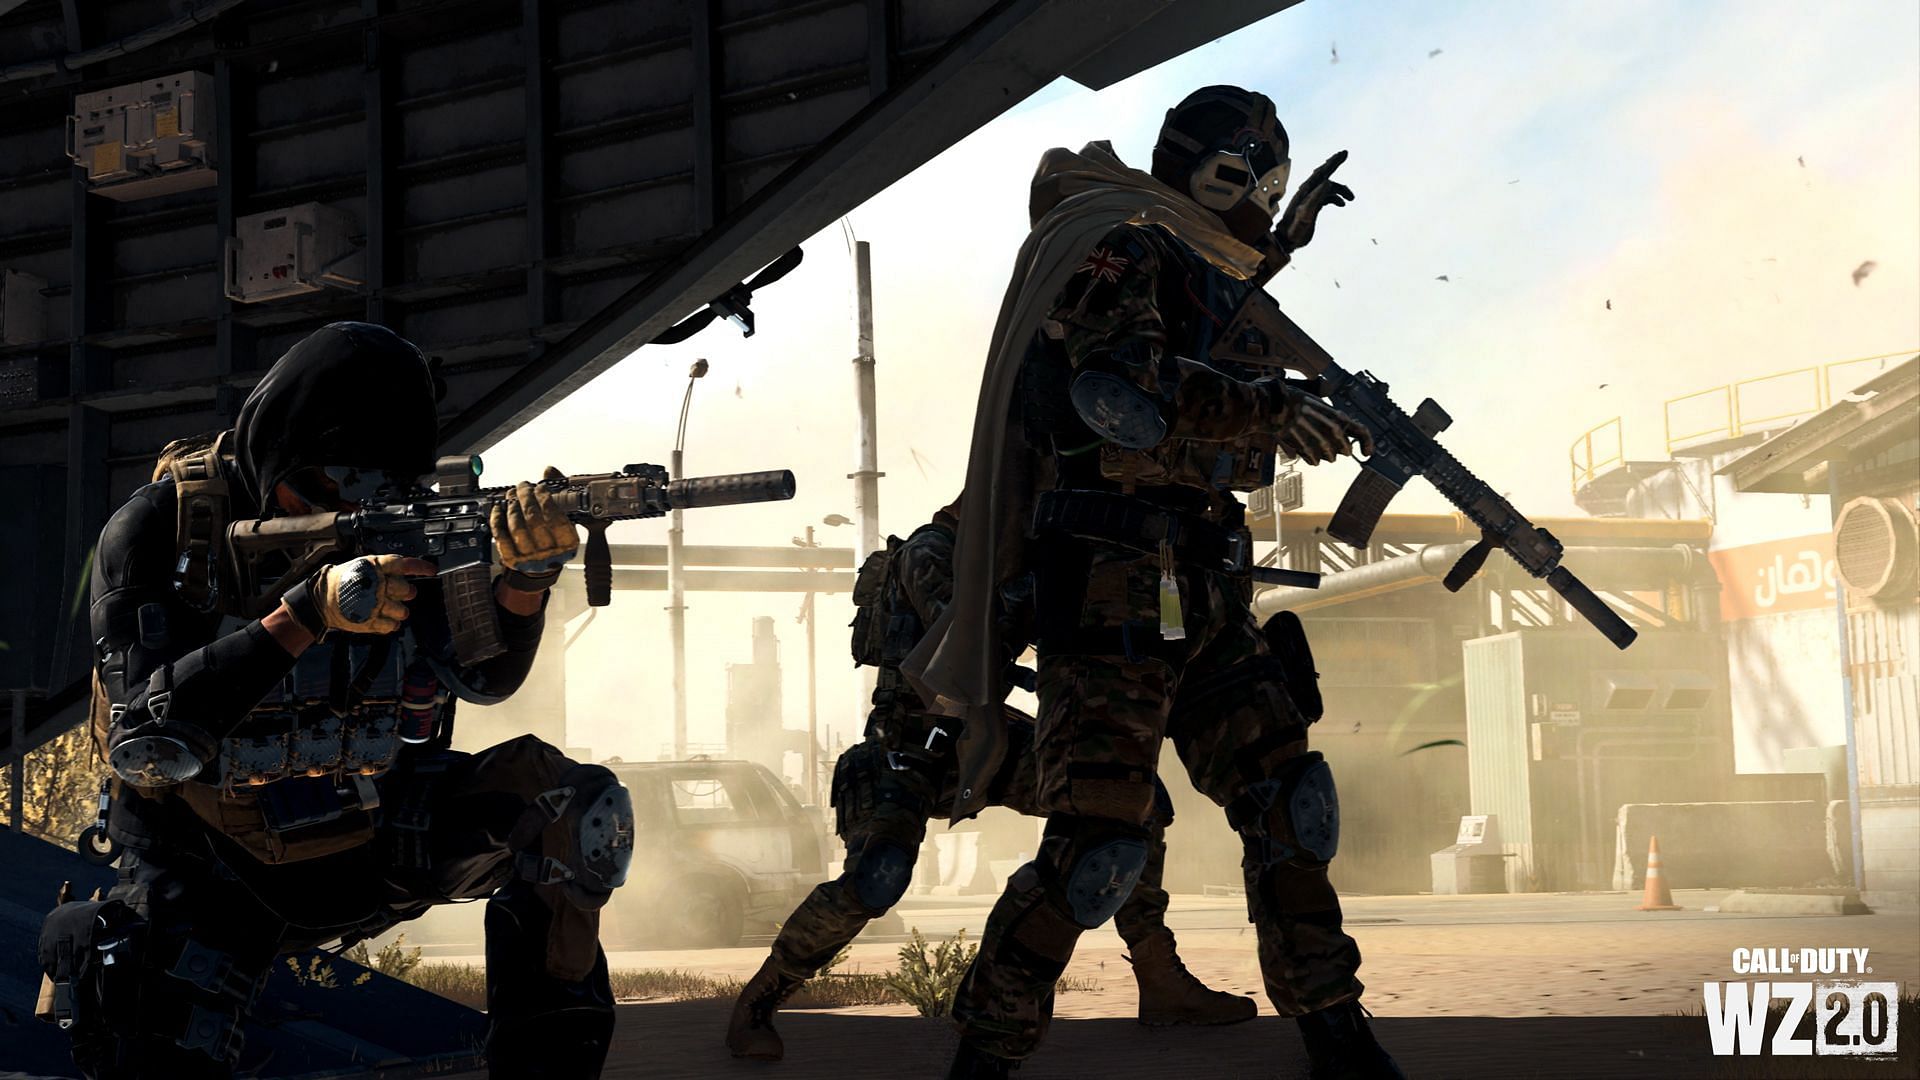 New Call of Duty: Warzone mode is the change the game needs